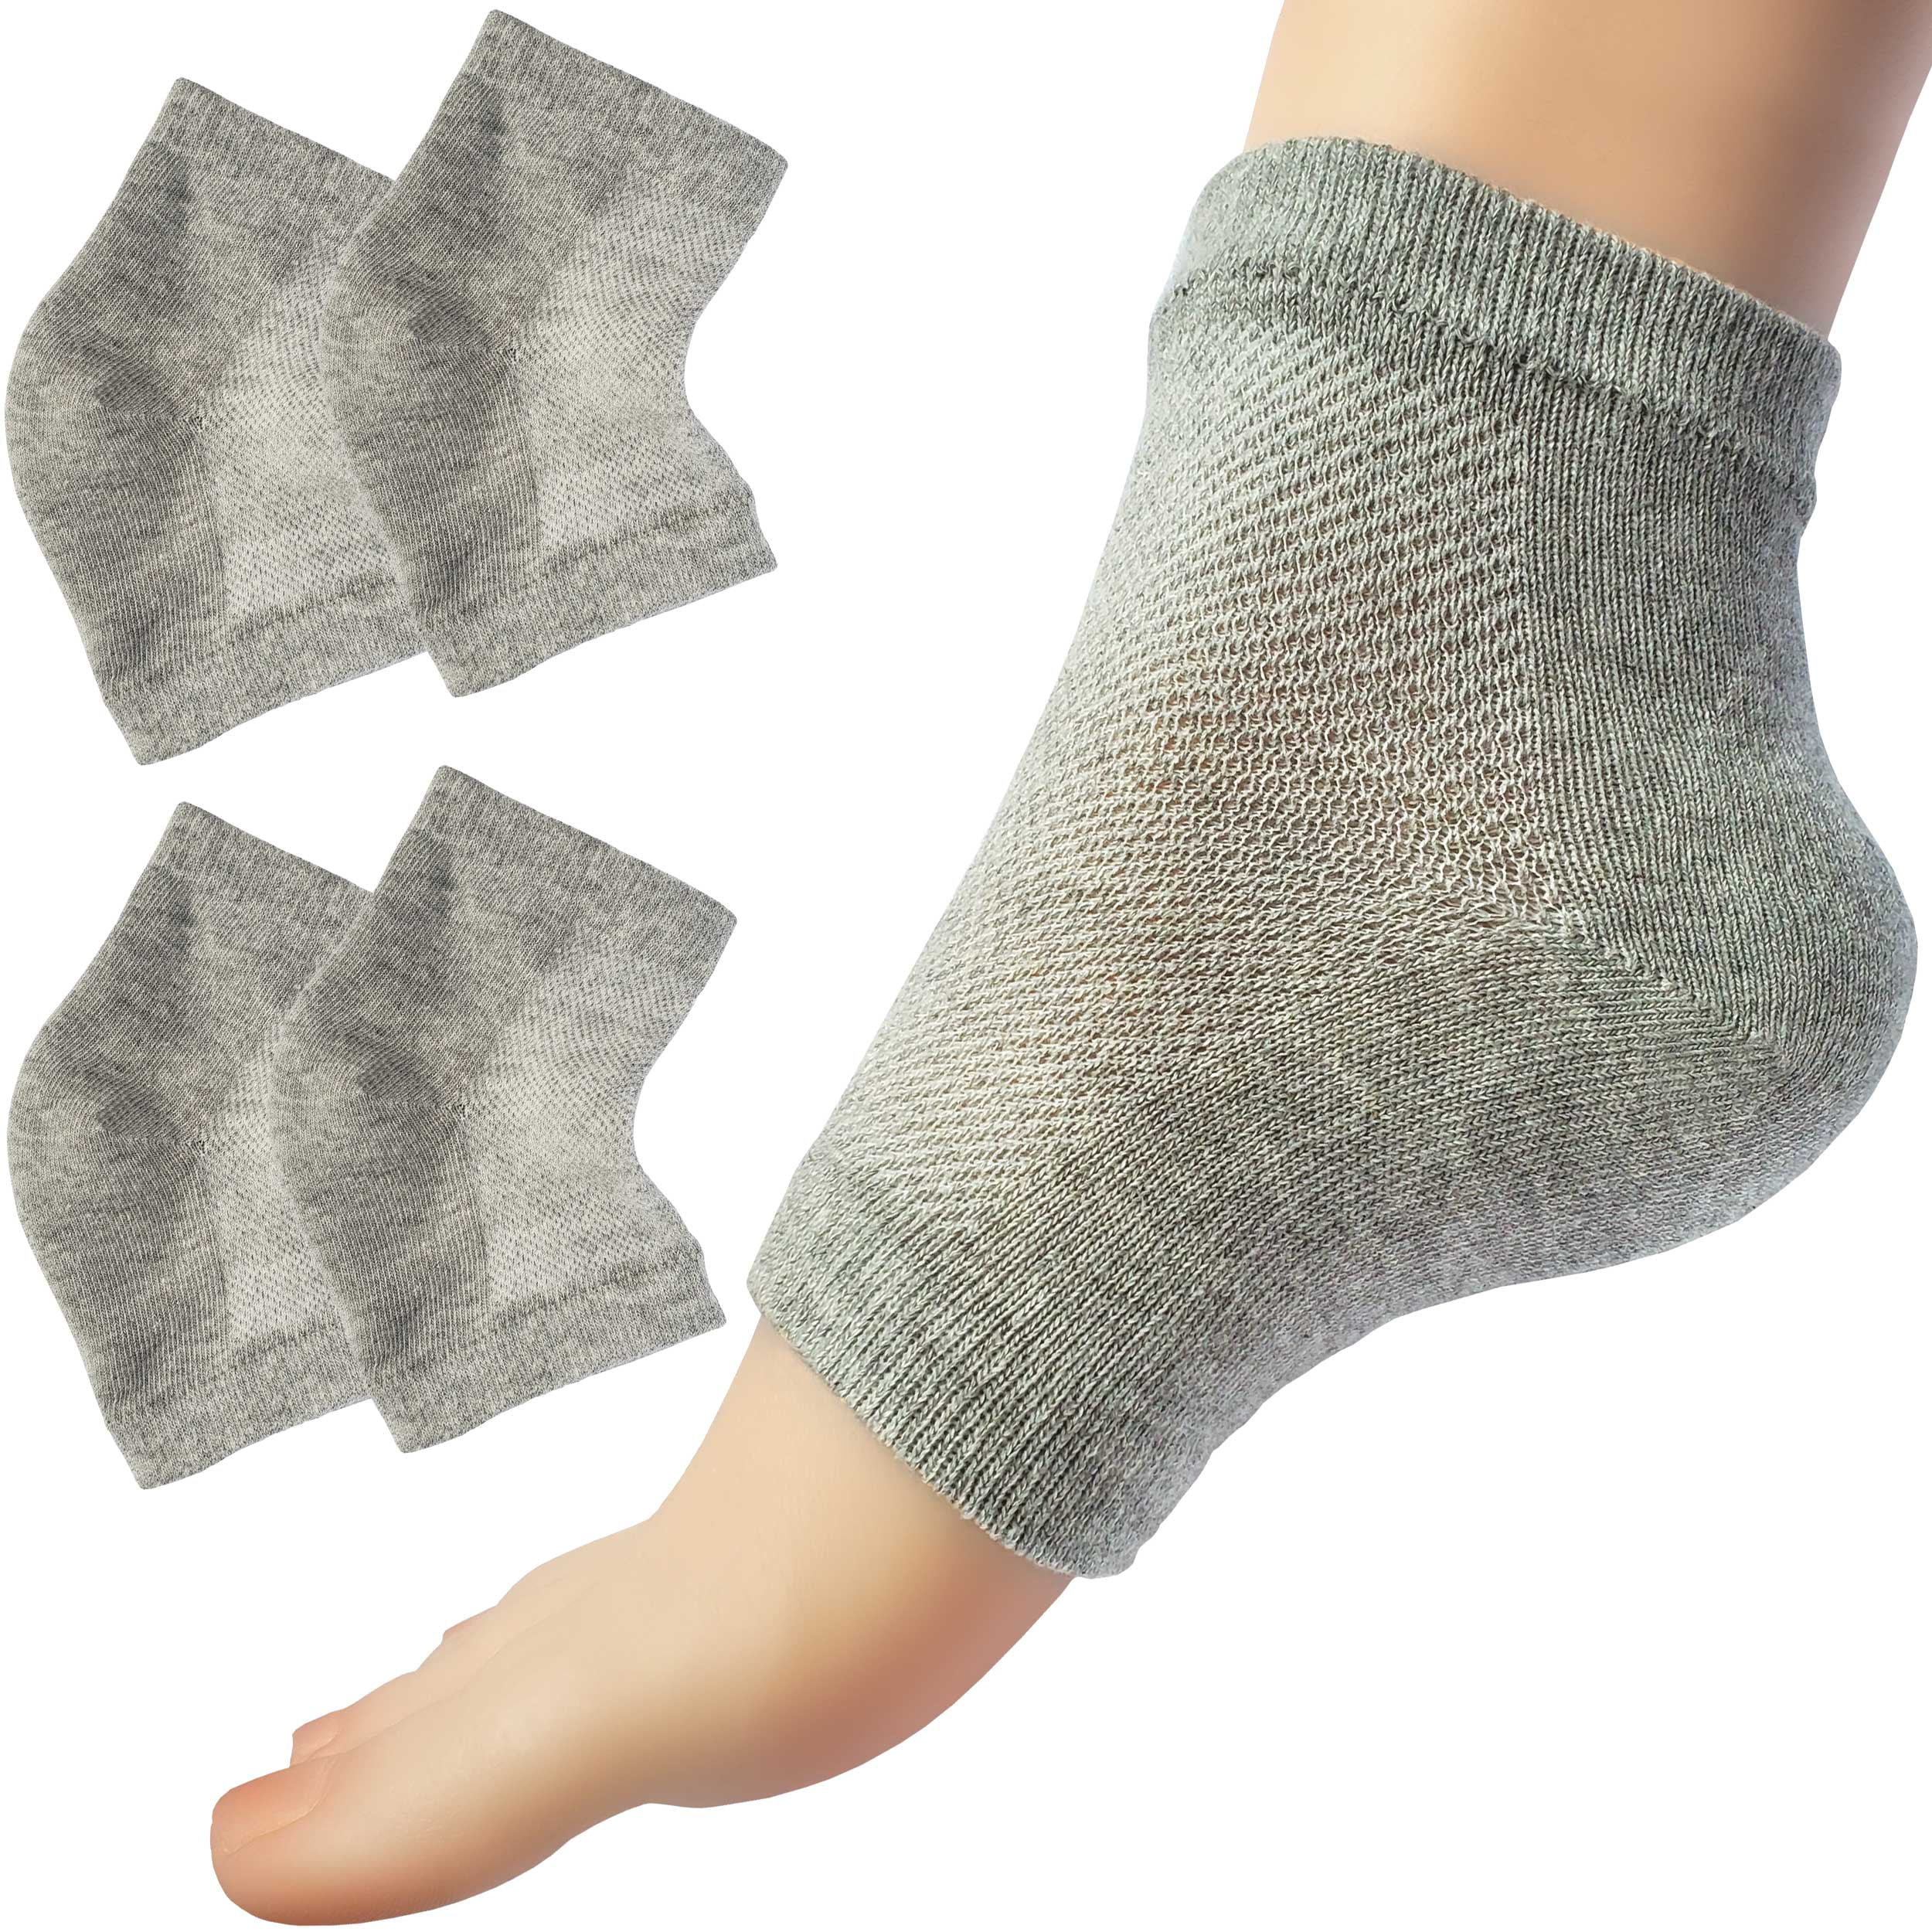 Chiroplax Vented Moisturizing Socks for Dry Cracked Heels Feet Treatment Gel Lined Spa to Repair Heal Soften Calluses Overnight 2 Pairs Gray 30127ed8 ba0f 4eef b567 8befe35a2793.961c8114c3b5411760e03a3e7eec4b29